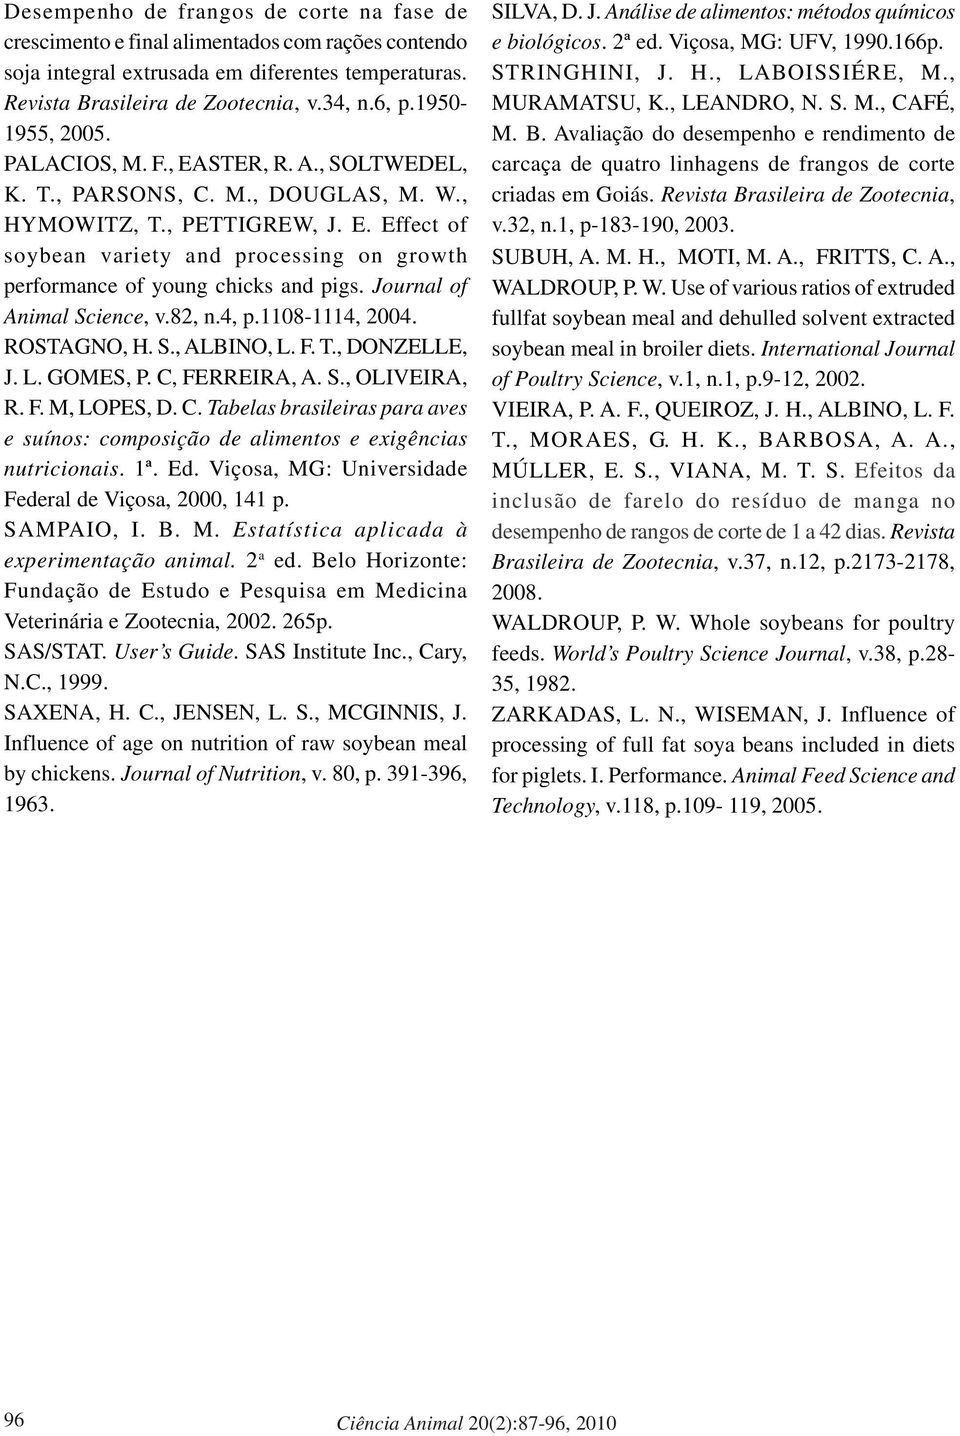 Journal of Animal Science, v.82, n.4, p.1108-1114, 2004. ROSTAGNO, H. S., ALBINO, L. F. T., DONZELLE, J. L. GOMES, P. C,